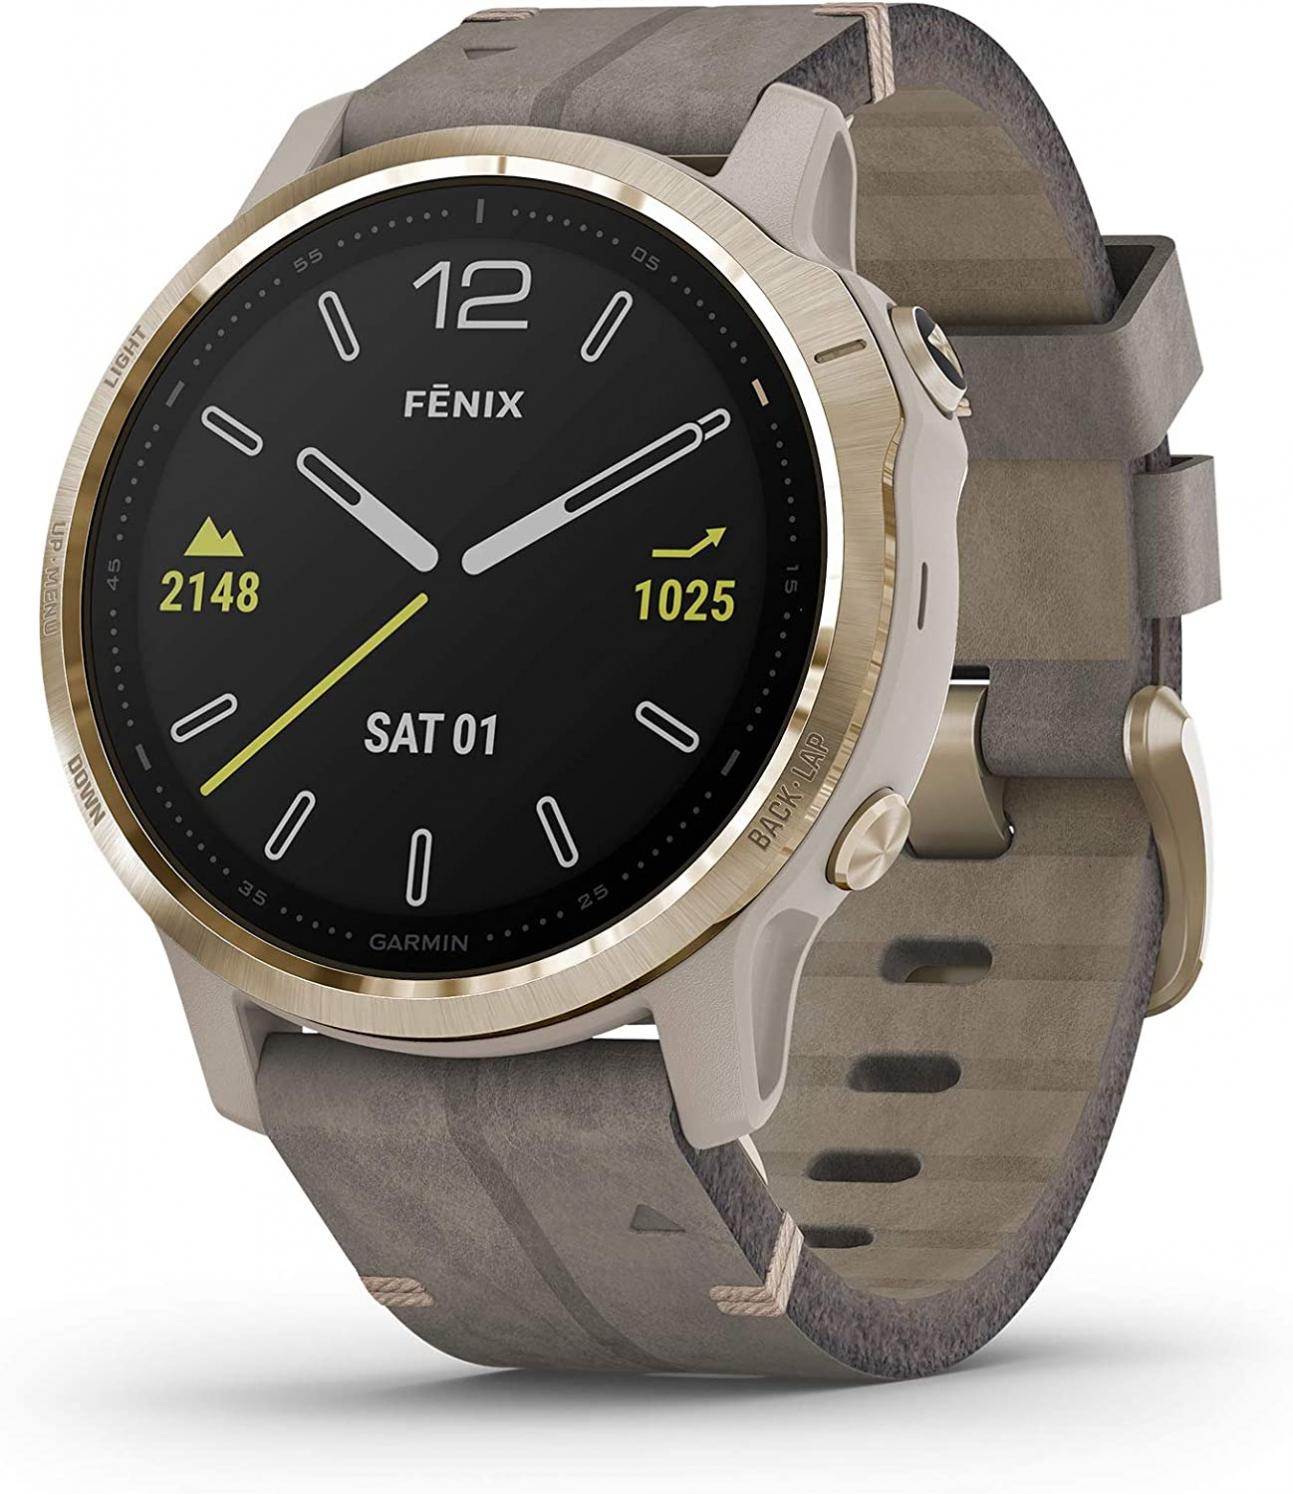 Garmin fenix 6S Sapphire, Premium Multisport GPS Watch, Smaller-Sized, Features Mapping, Music, Grade-Adjusted Pace Guidance and Pulse Ox Sensors, Light Gold with Gray Leather Band